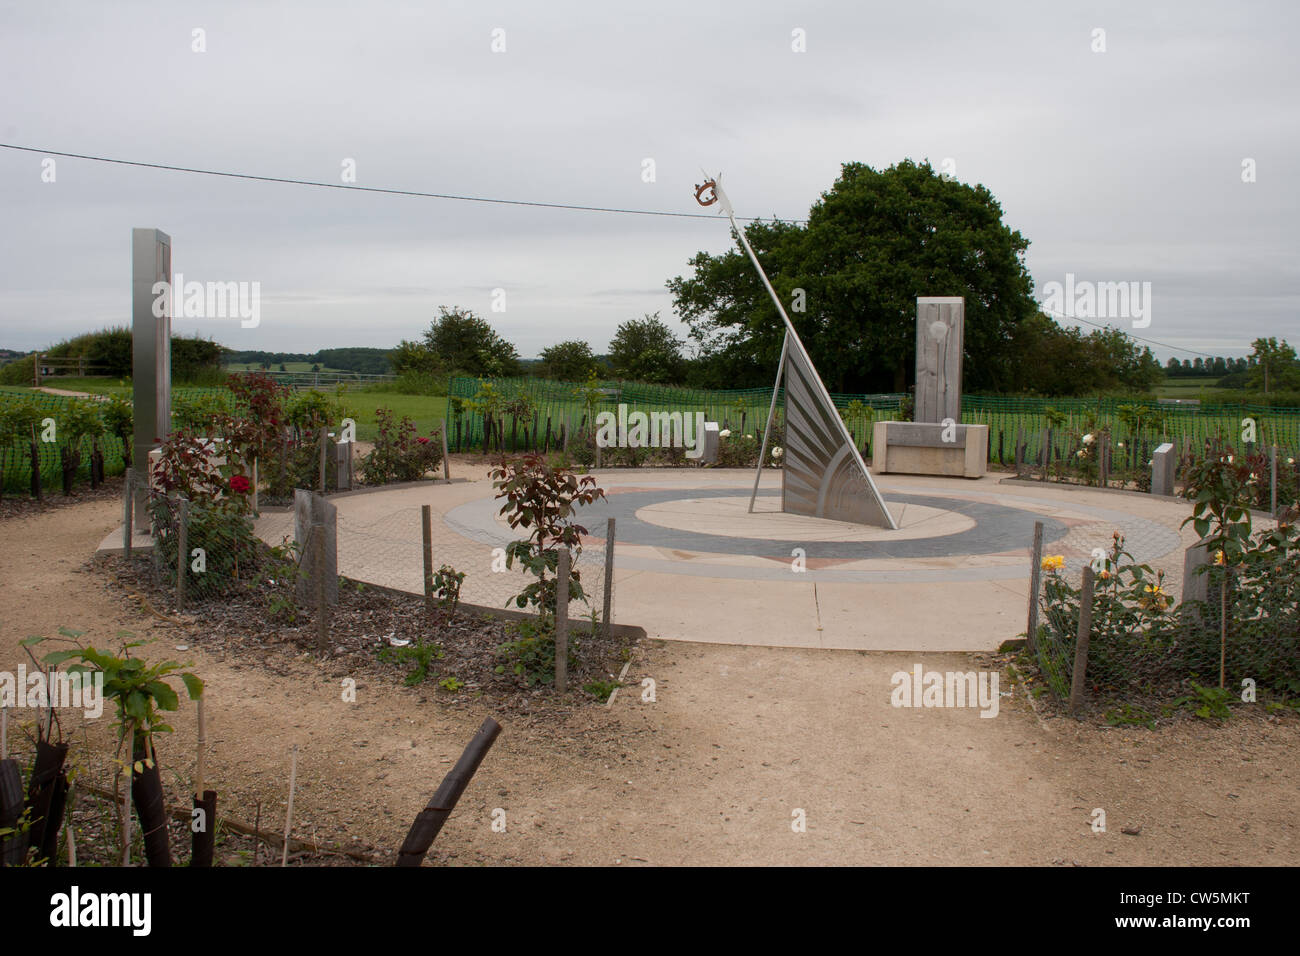 At the Heritage centre of Bosworth Battlefield, in a circular rose garden there is a sun dial. Stock Photo